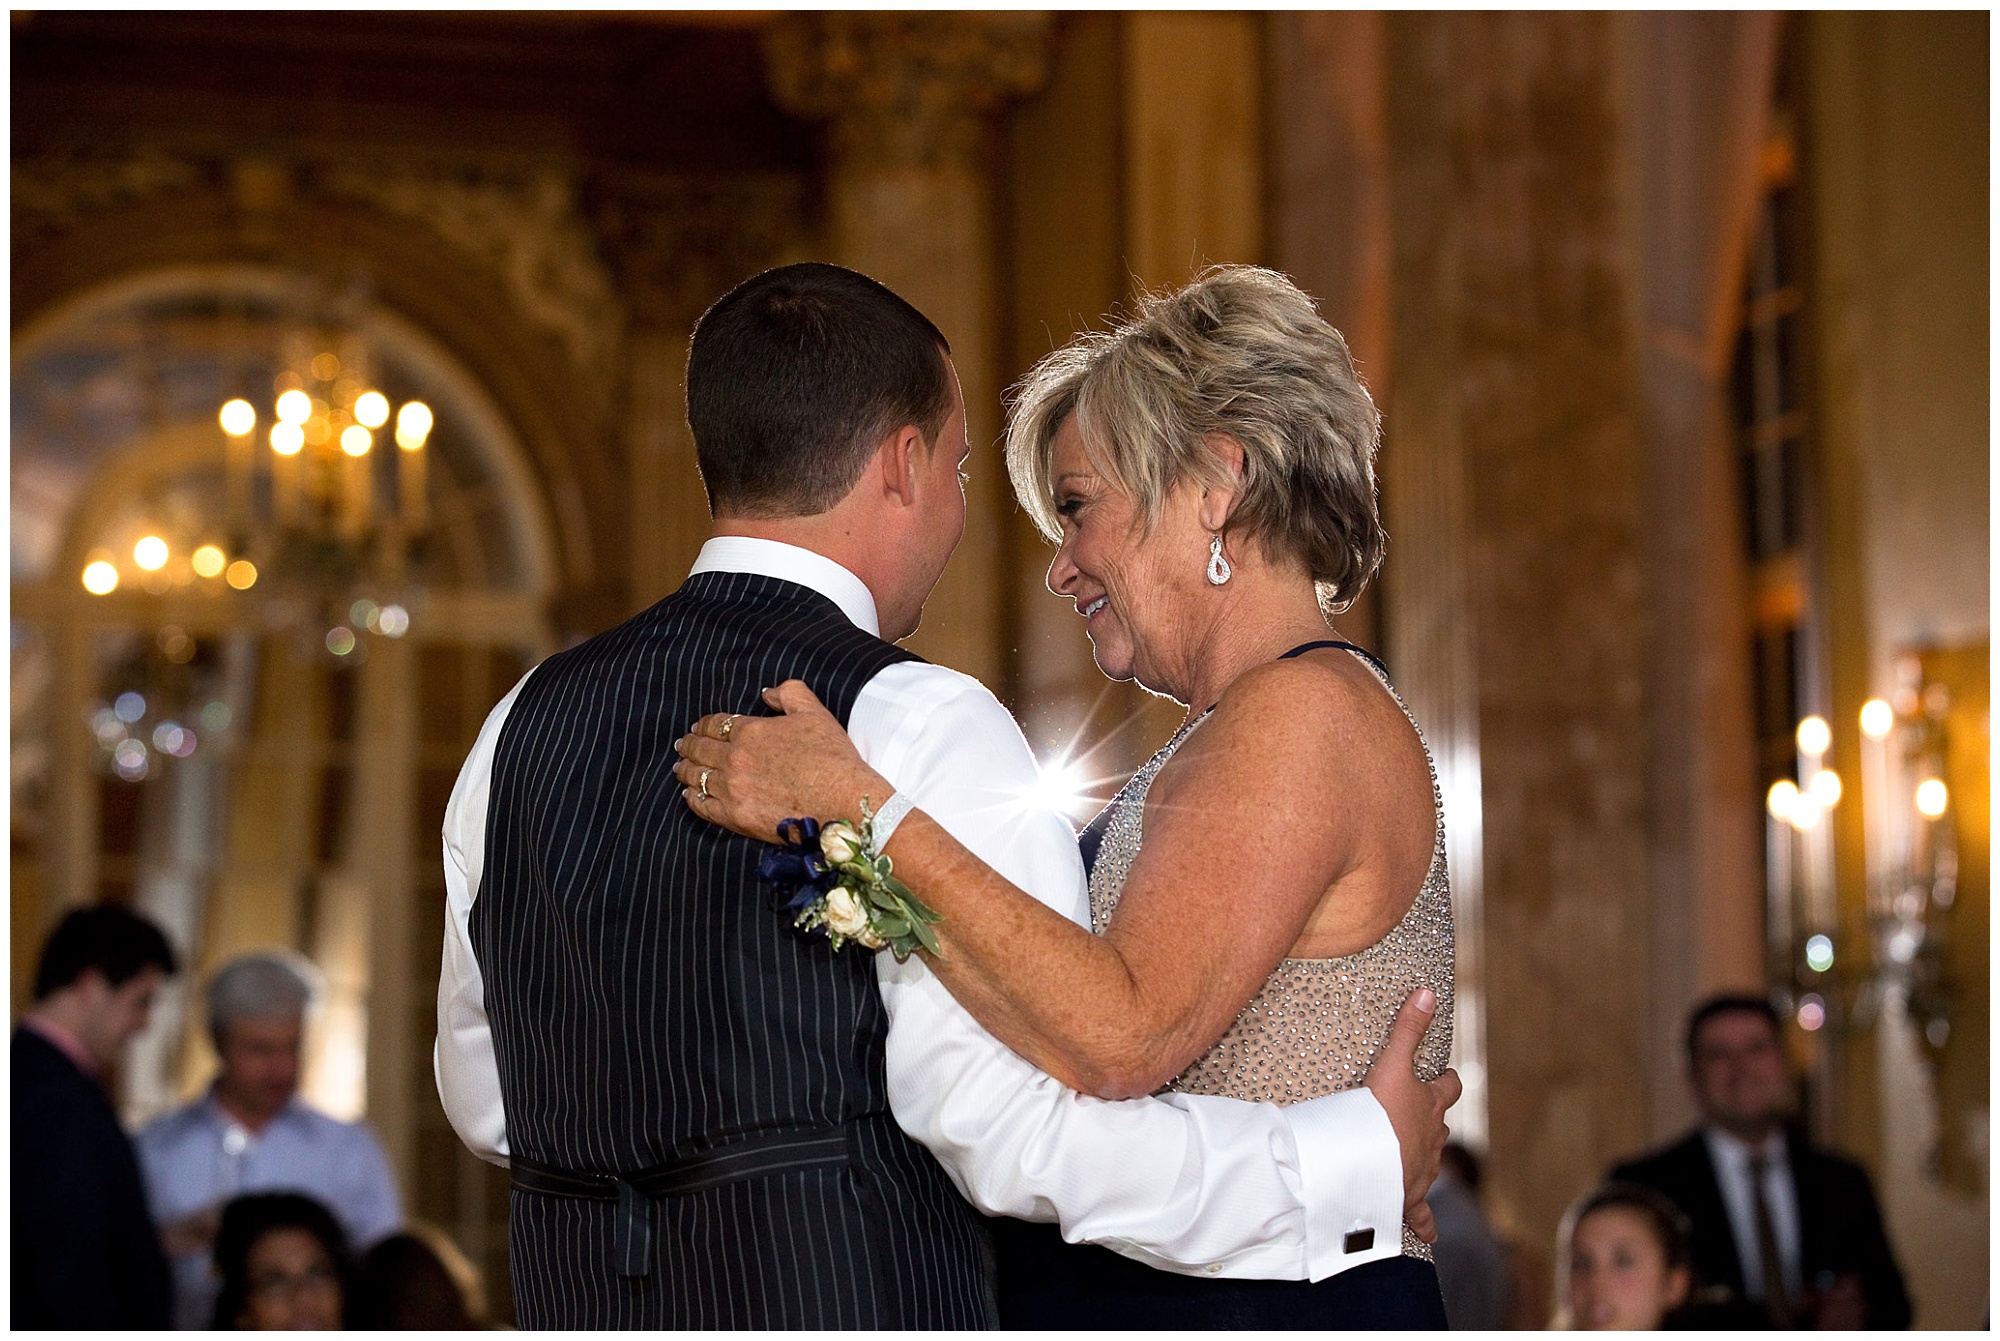 Photos of the groom and his mother during the parent dances of the wedding reception.